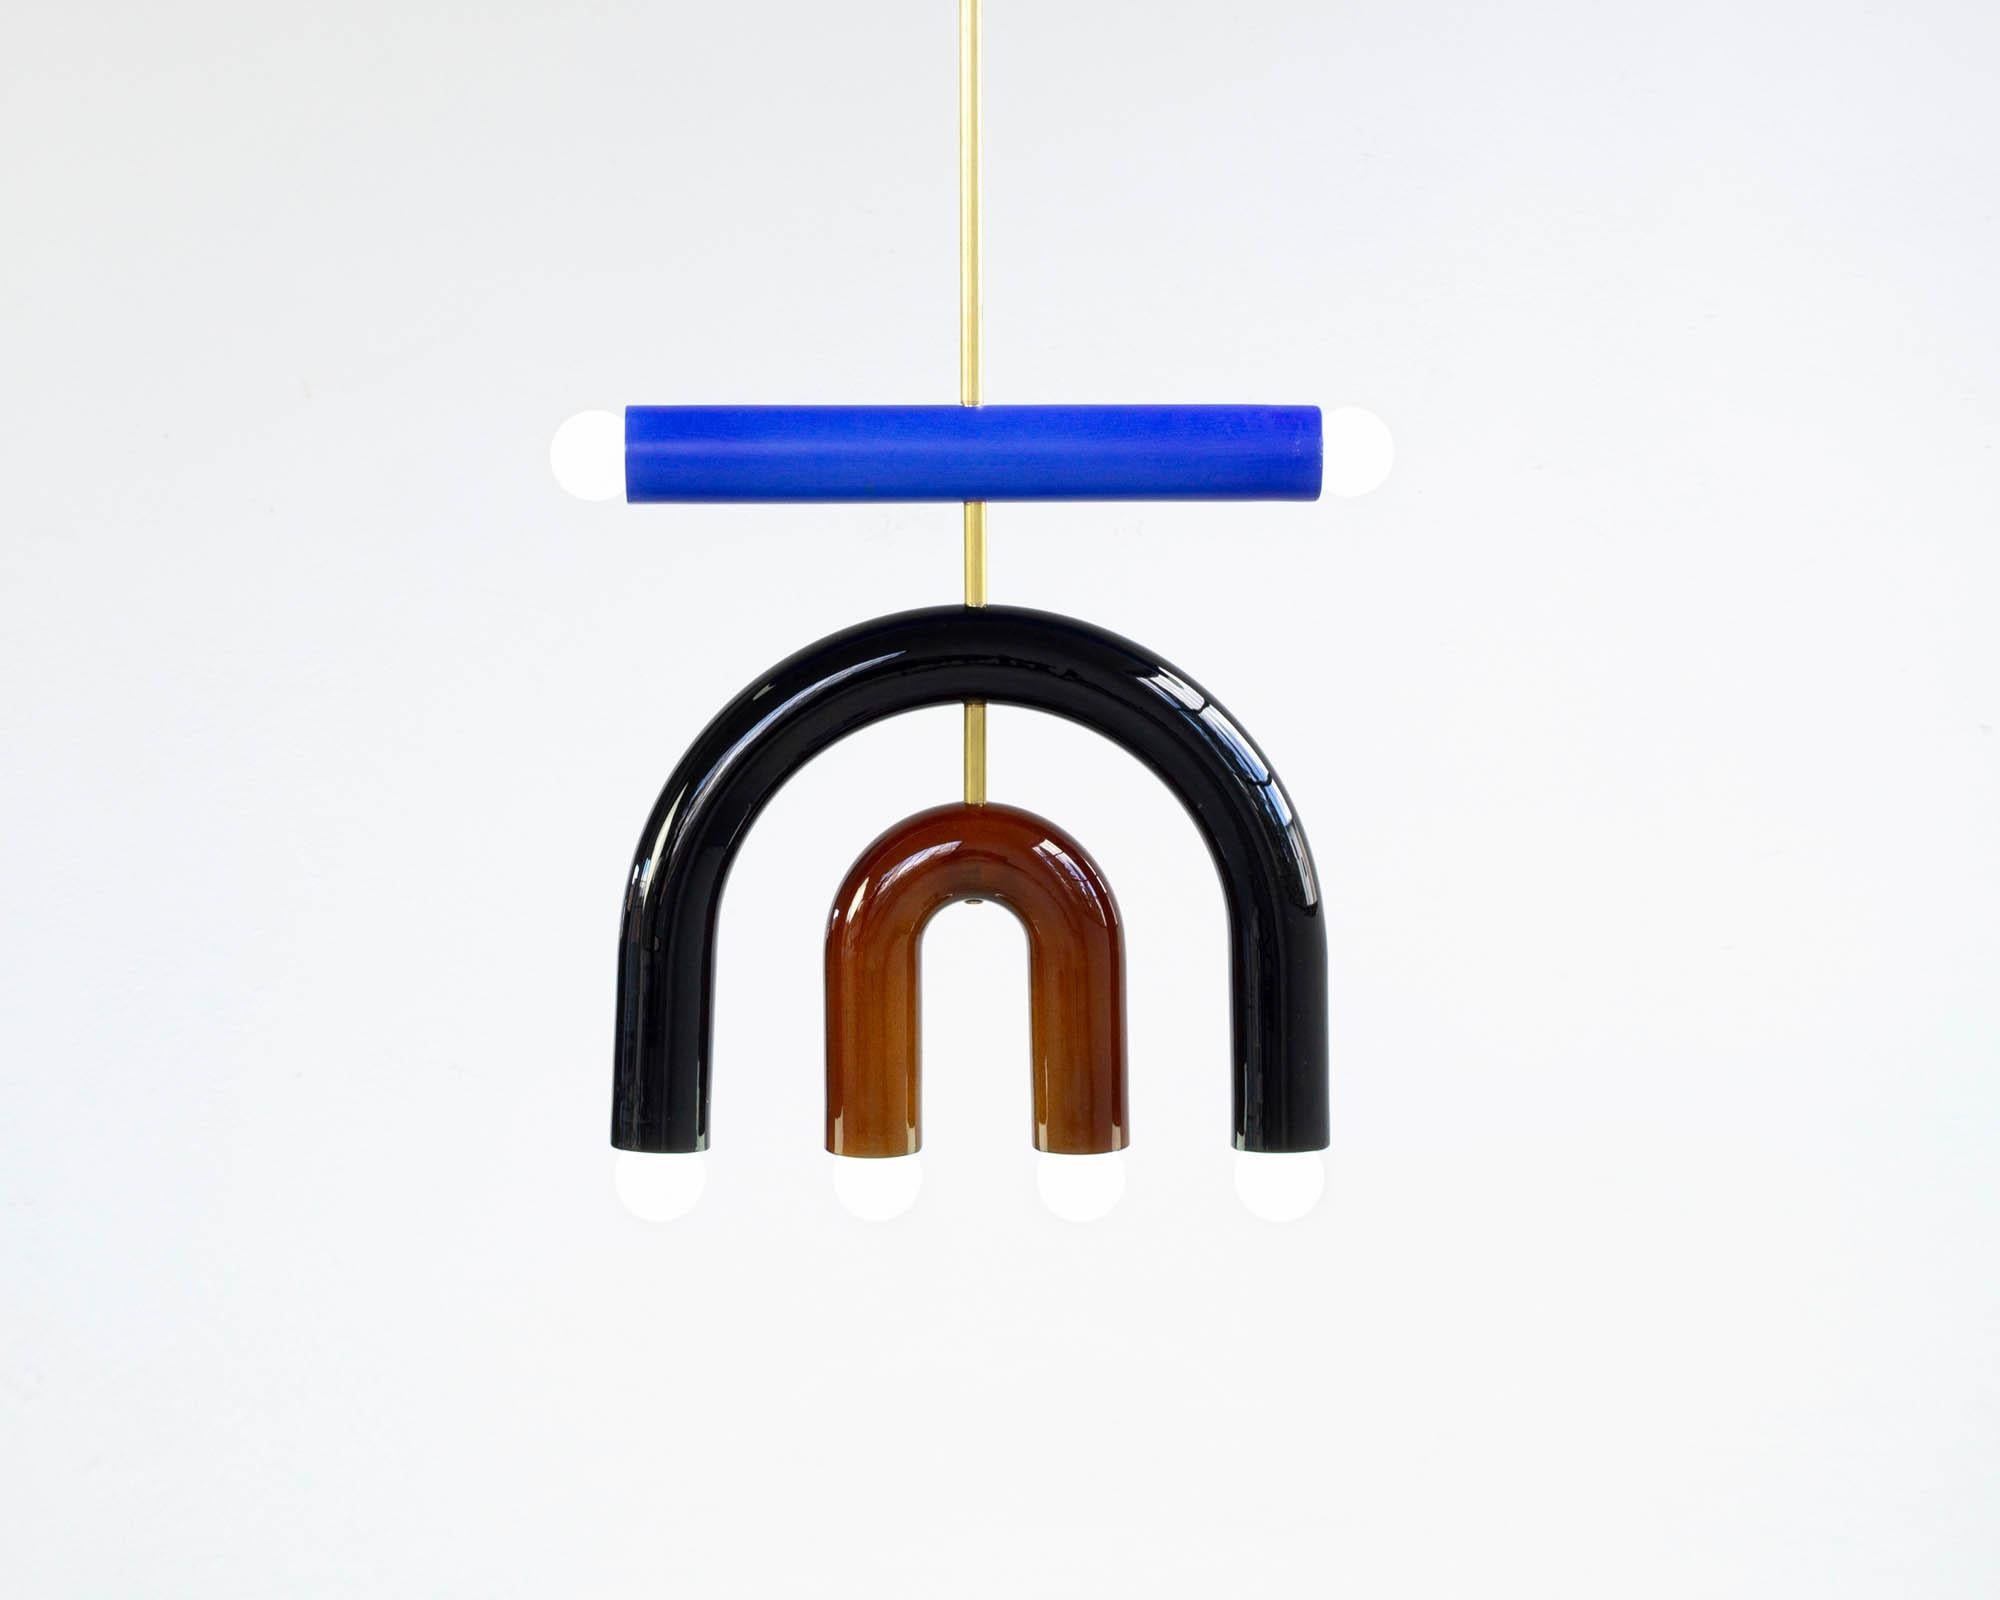 TRN D1 Pendant lamp / Ceiling lamp / chandelier 
Signed by Pani Jurek

Dimensions: H. 37.5 x 35 x 5 cm
Model shown: Cobalt blue, black & brown 

Bulb (not included): E27/E26, compatible with US electric system

Materials: Hand glazed ceramic and